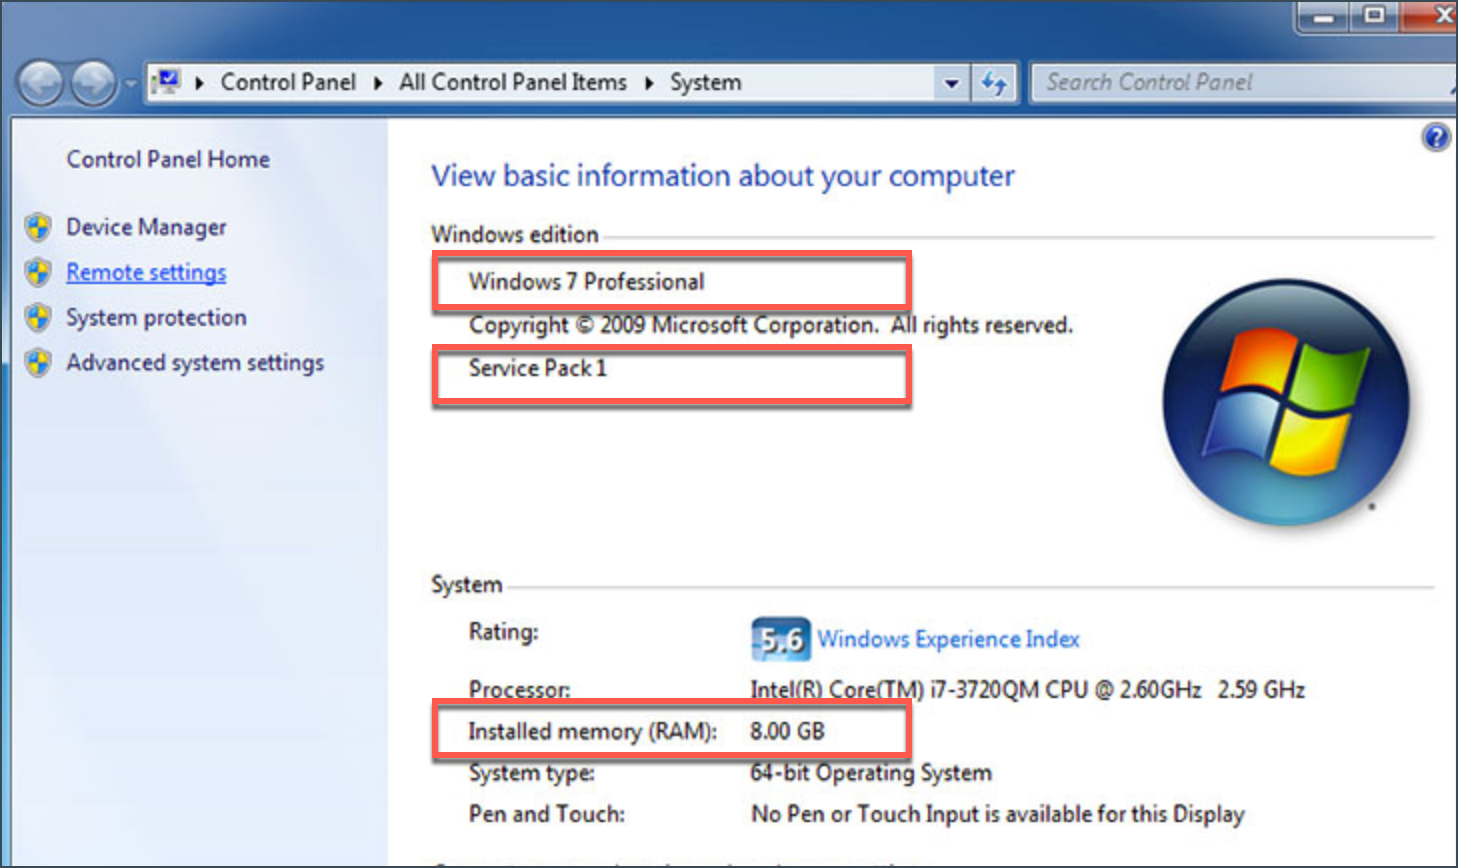 How to check System Requirements on Windows 7